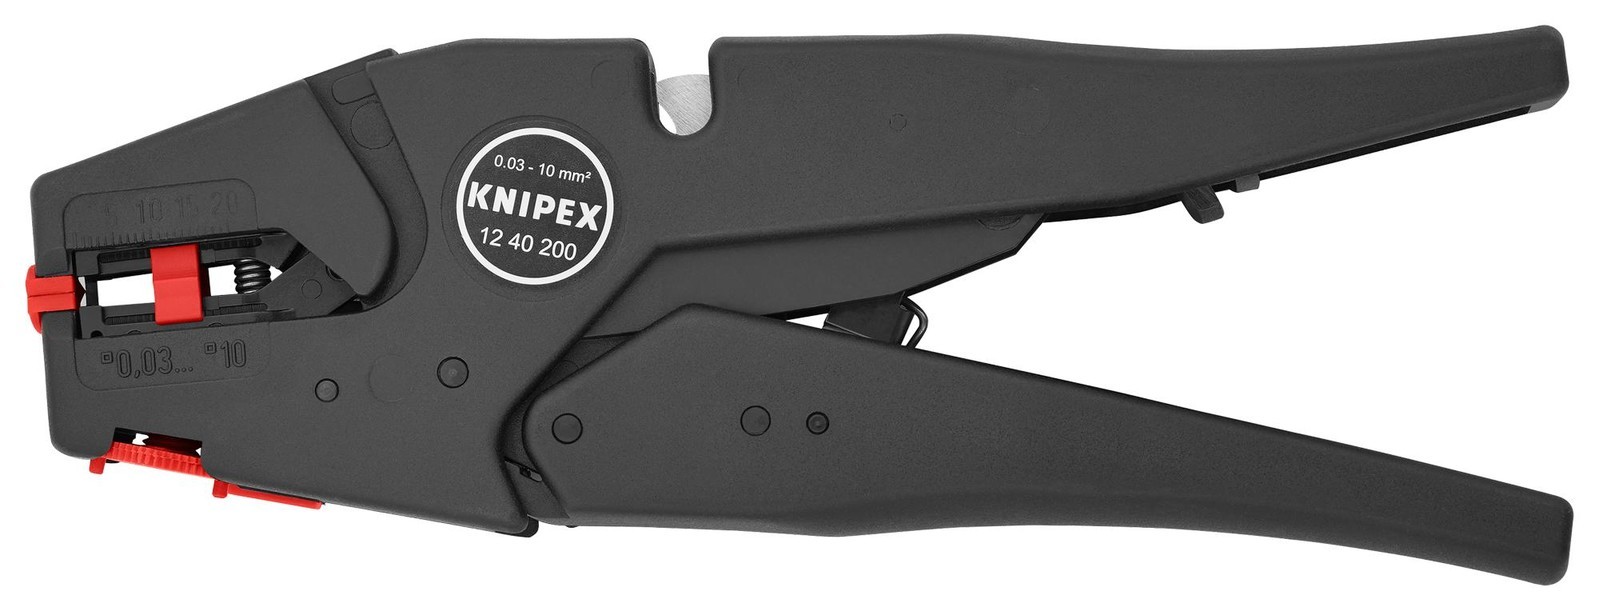 Knipex 12 40 200 Cable Stripper, 0.8-10mm2